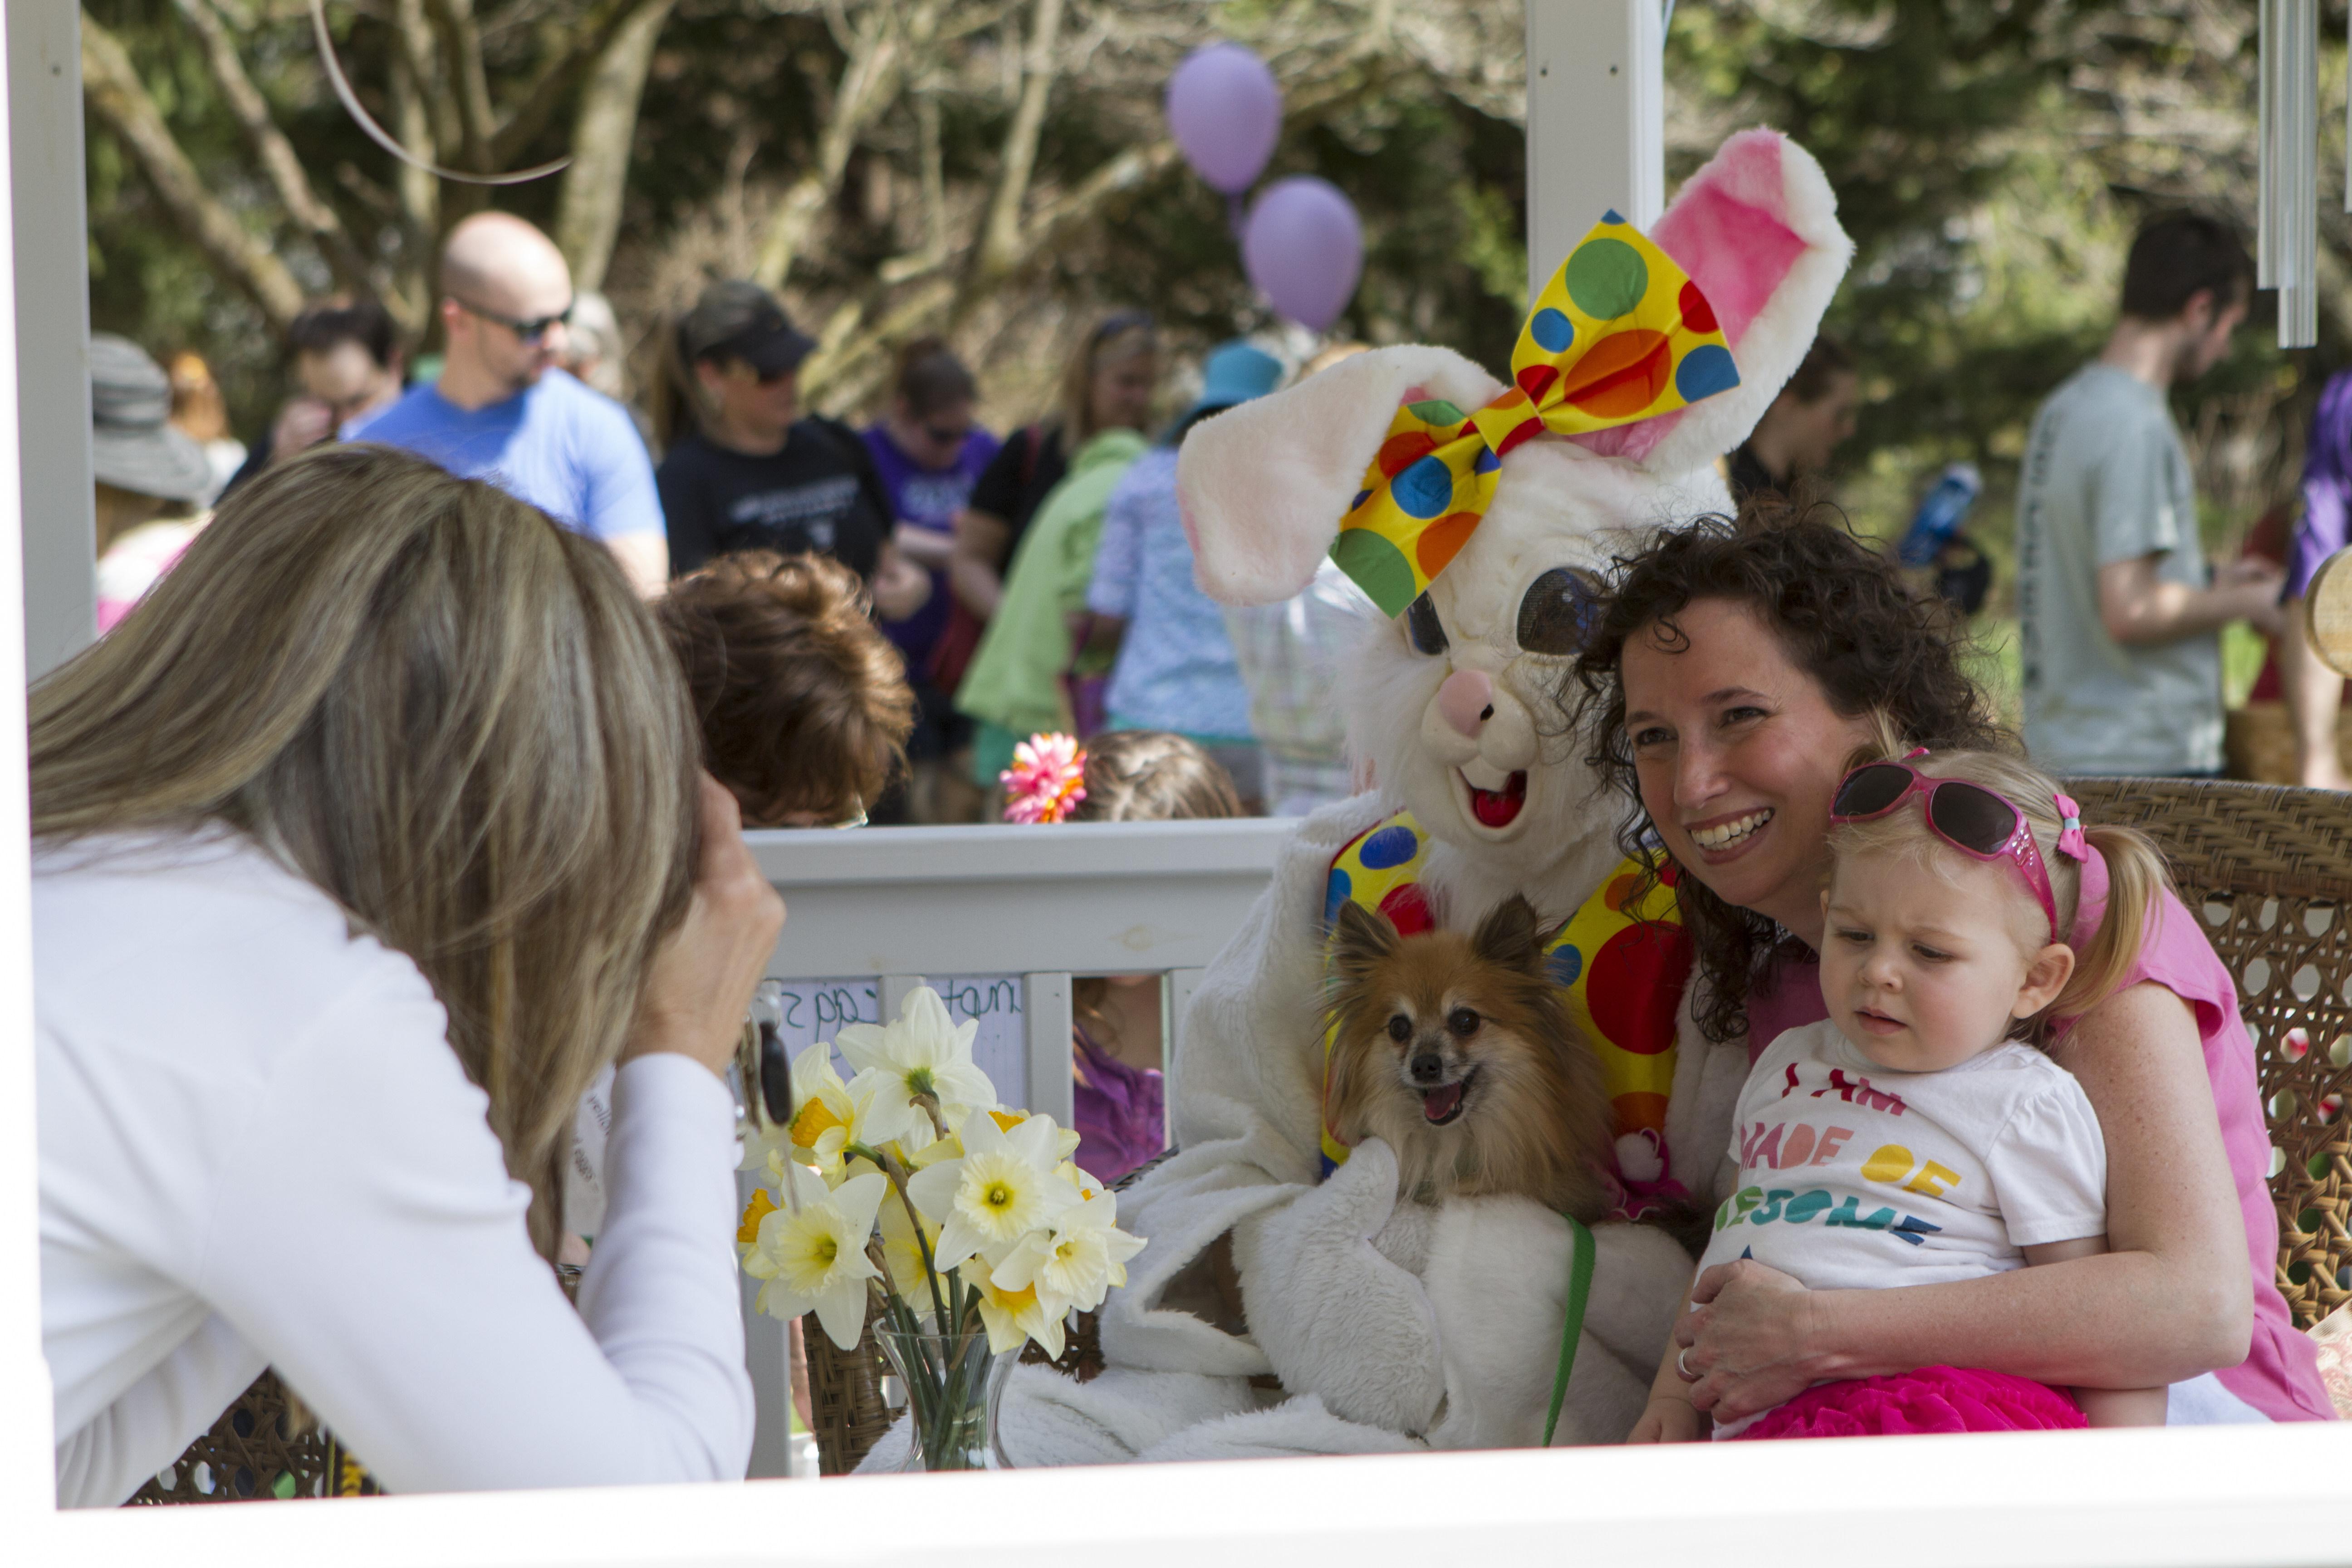 Deanna Pedicone, her daughter, Zoe, and their dog, Annabelle, with the Easter Bunny at Easter Bone Hunt in 2014.